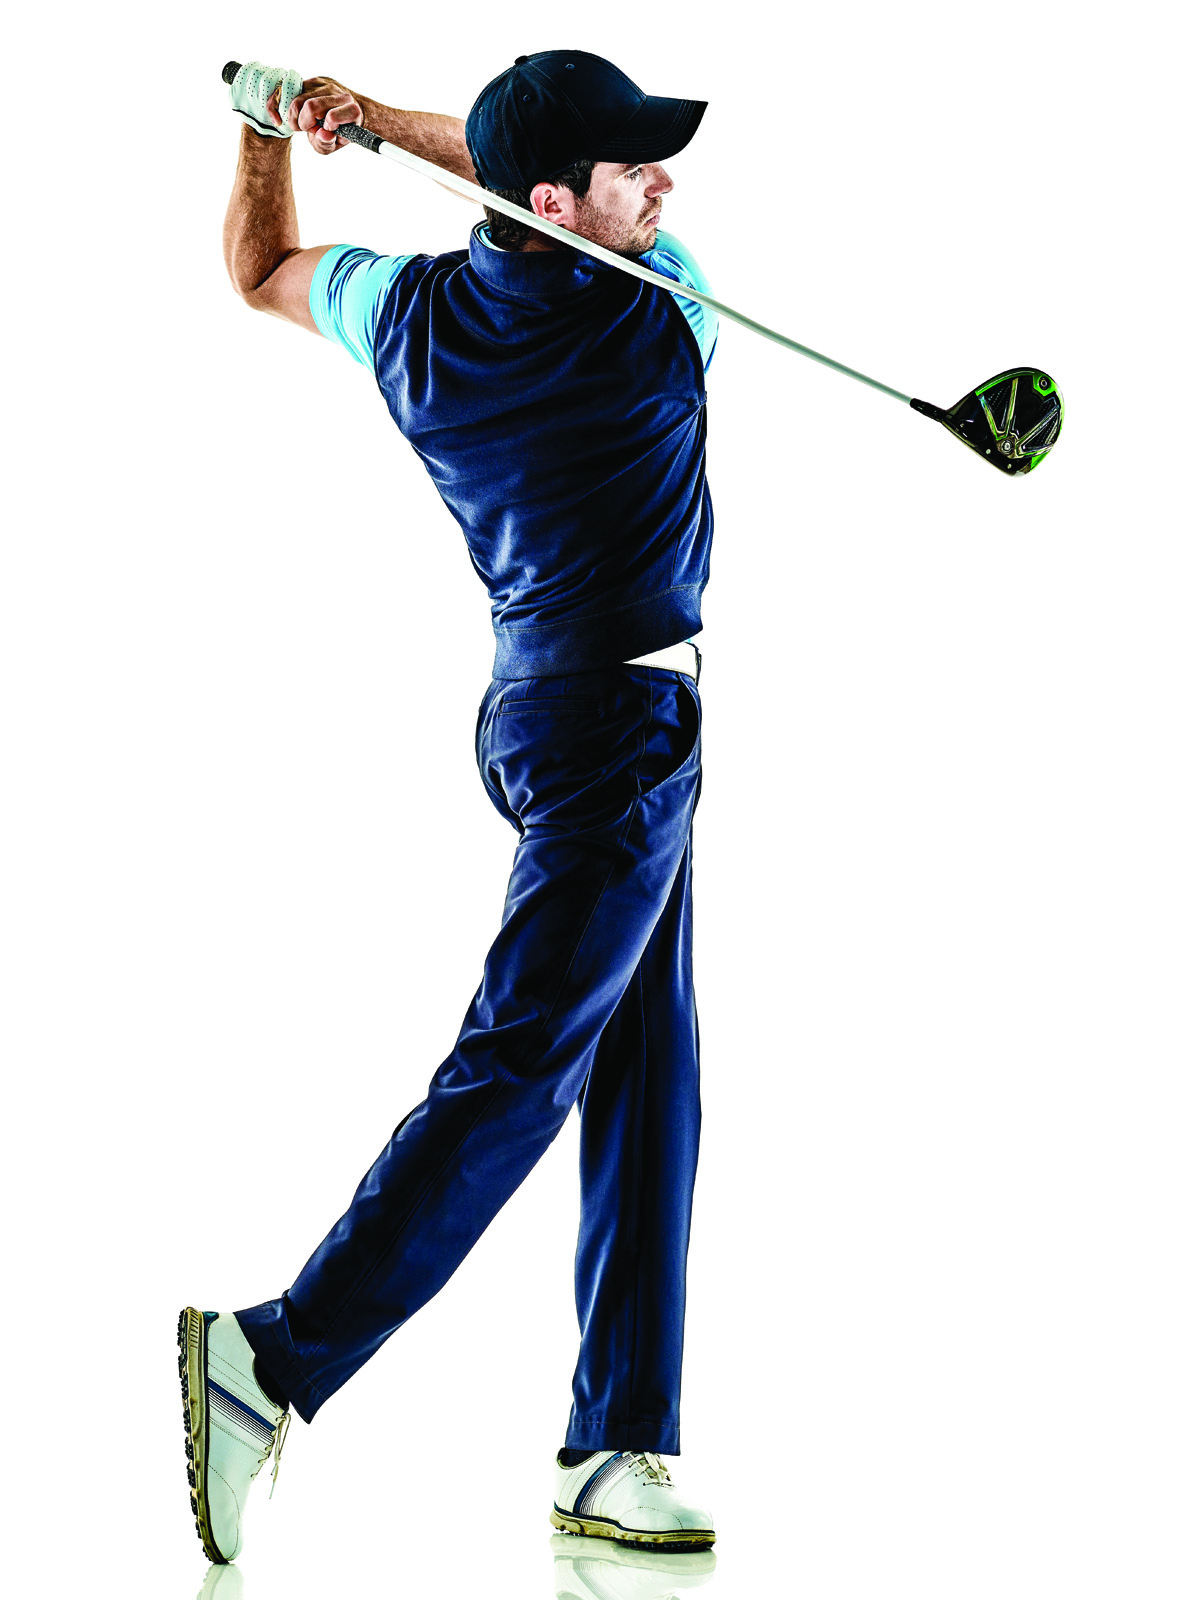 A golfer pictured mid swing